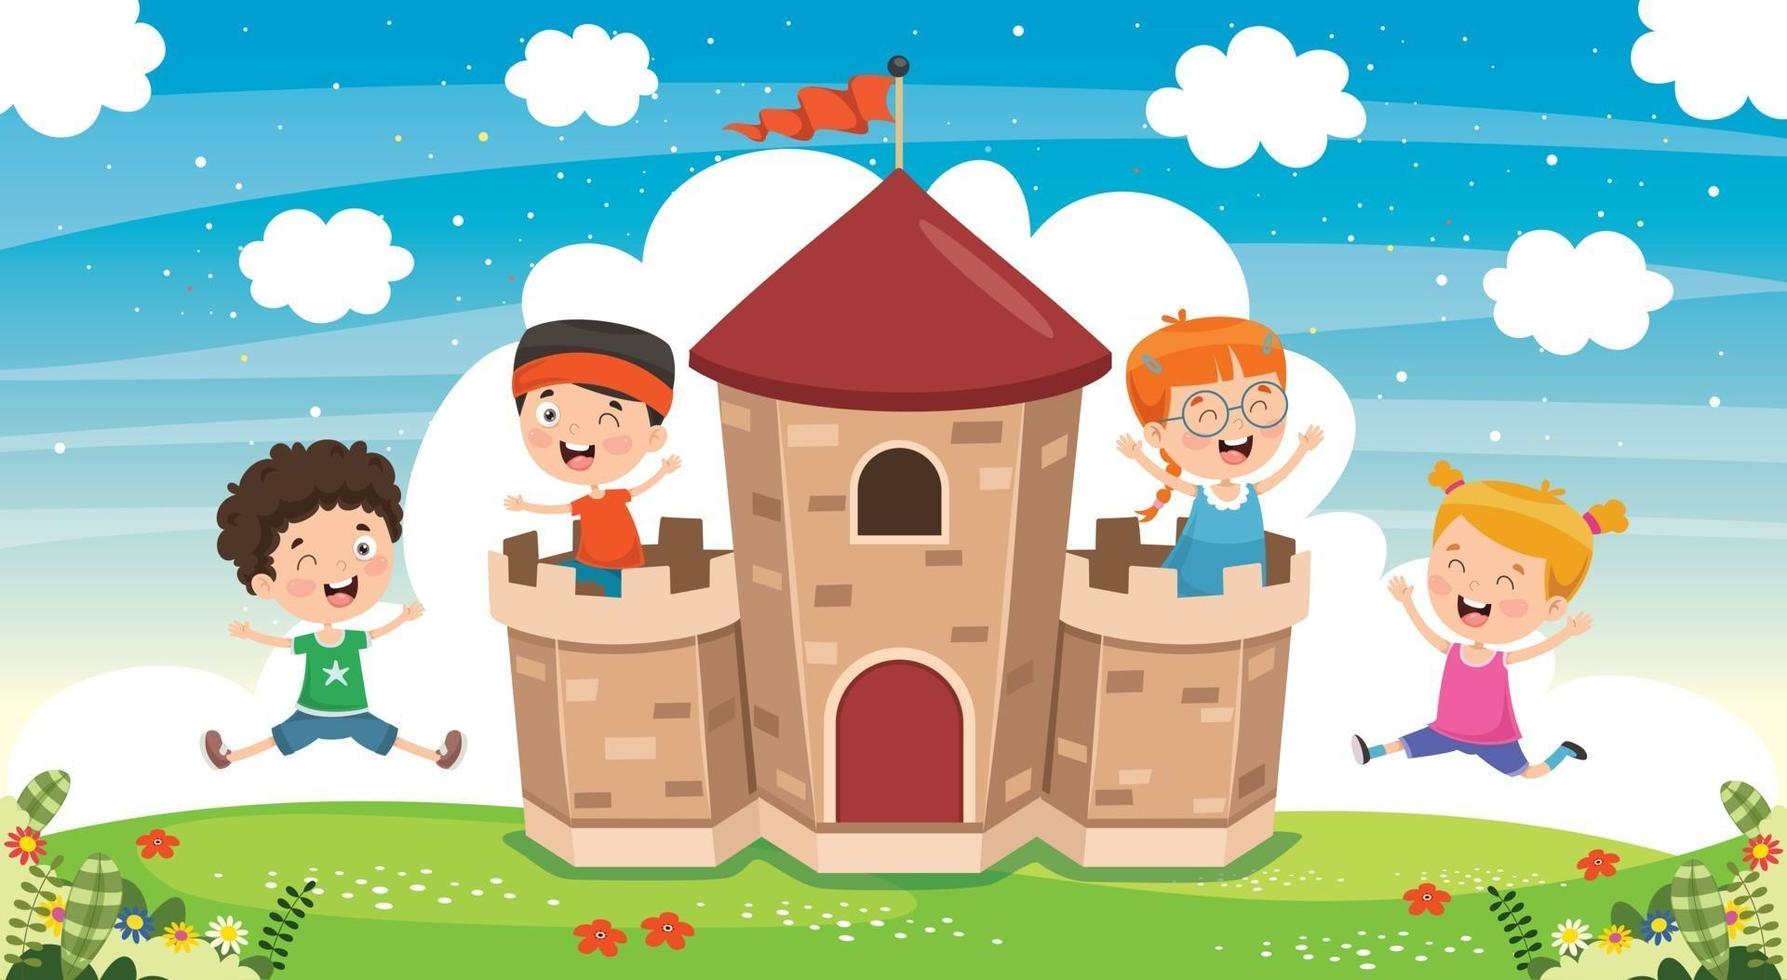 Fairy Tale Castle And Happy Children vector